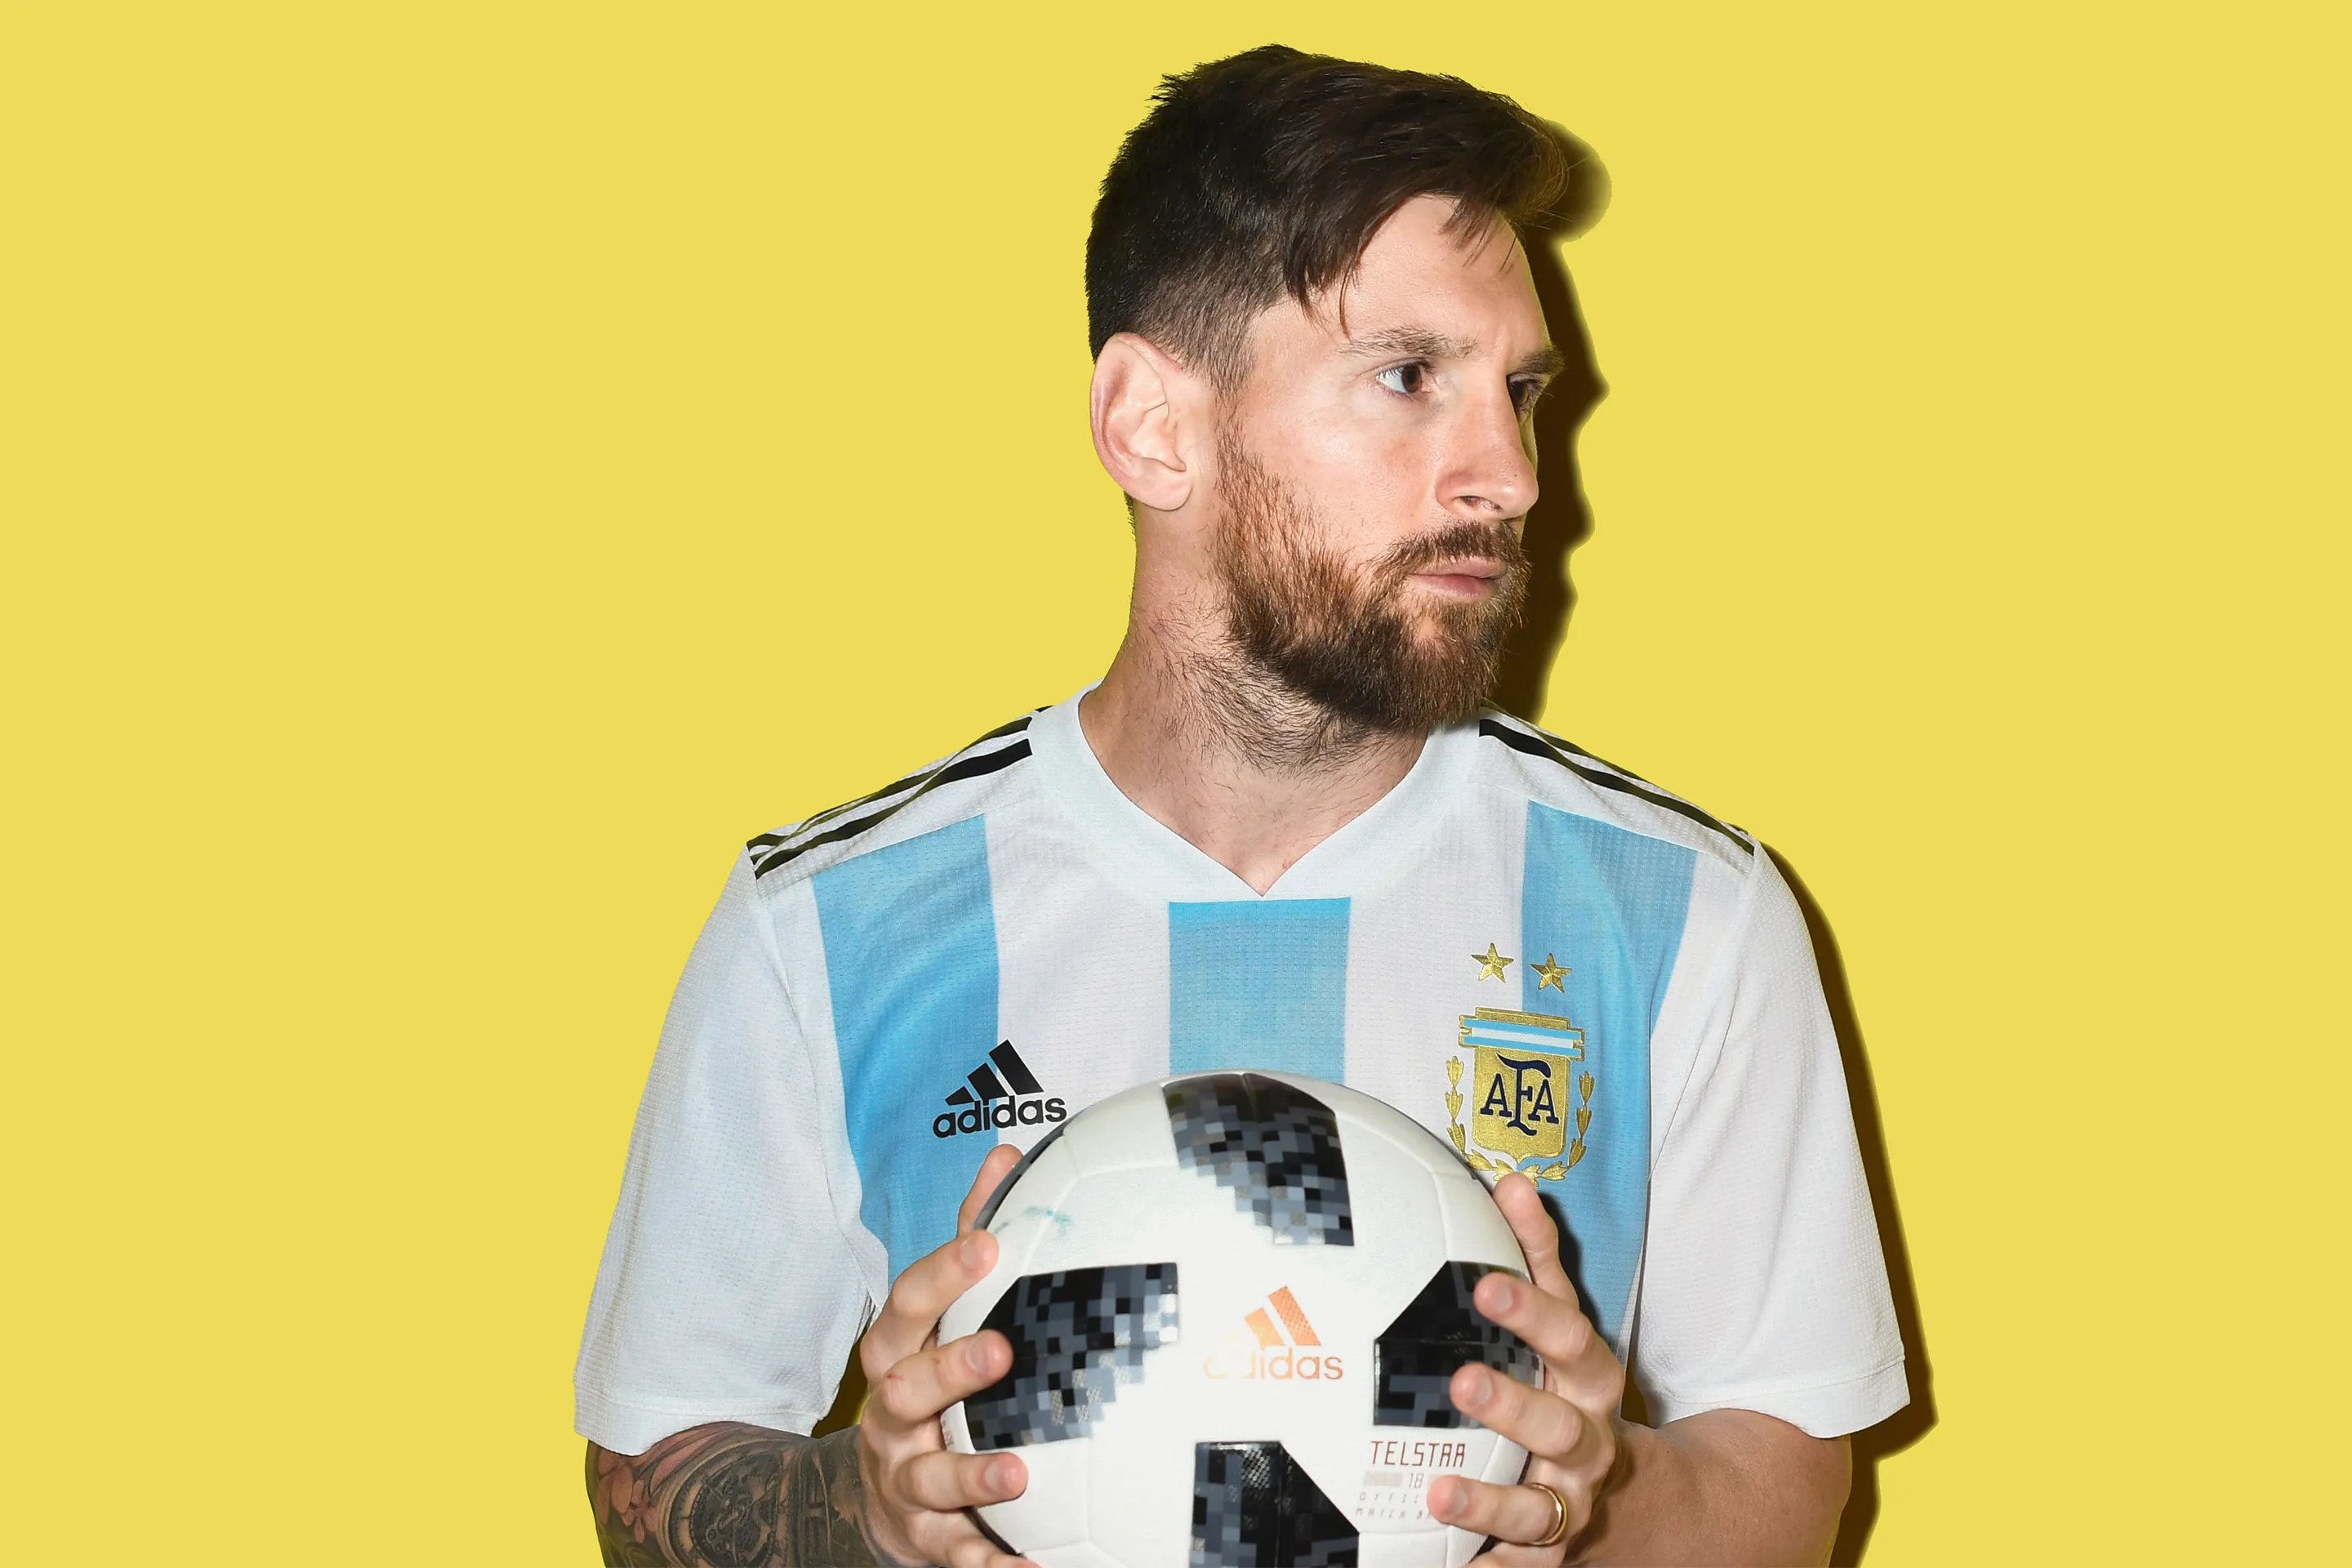 Lionel Messi: Biography, Soccer Player, Athlete